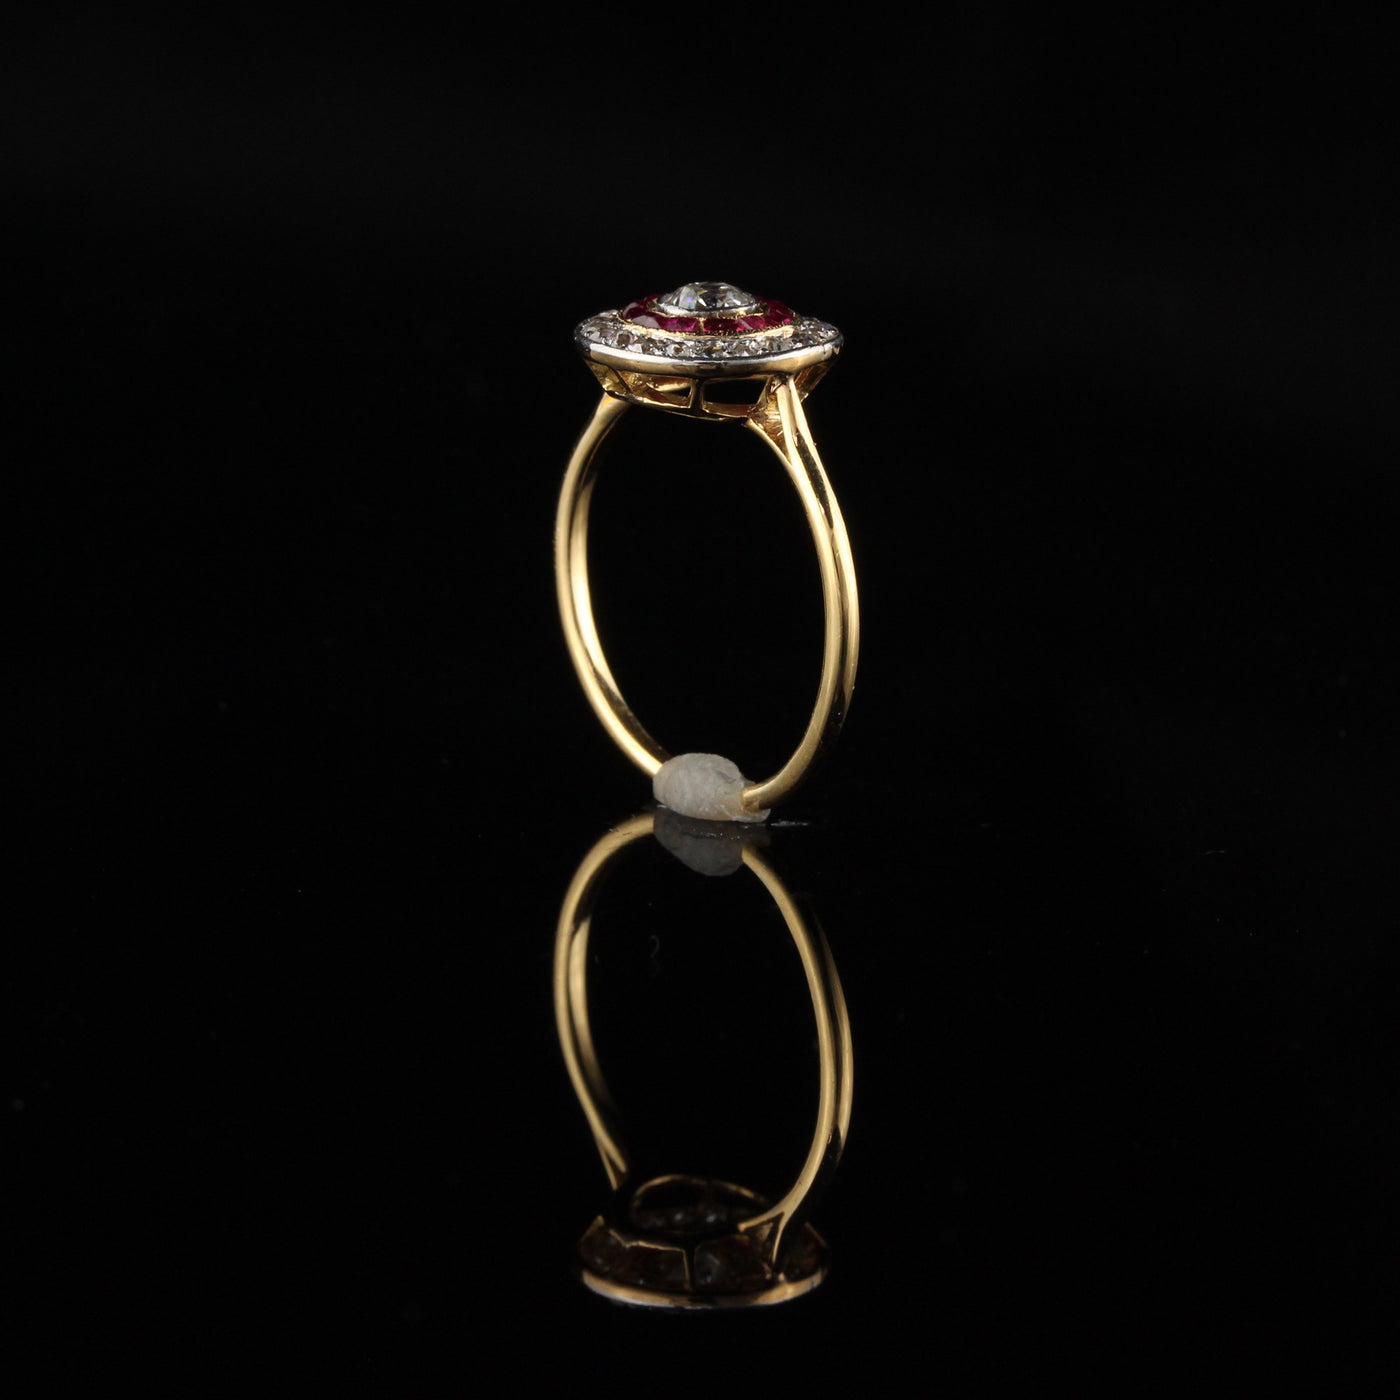 Antique Victorian 18K Yellow Gold Diamond and Ruby Engagement Ring